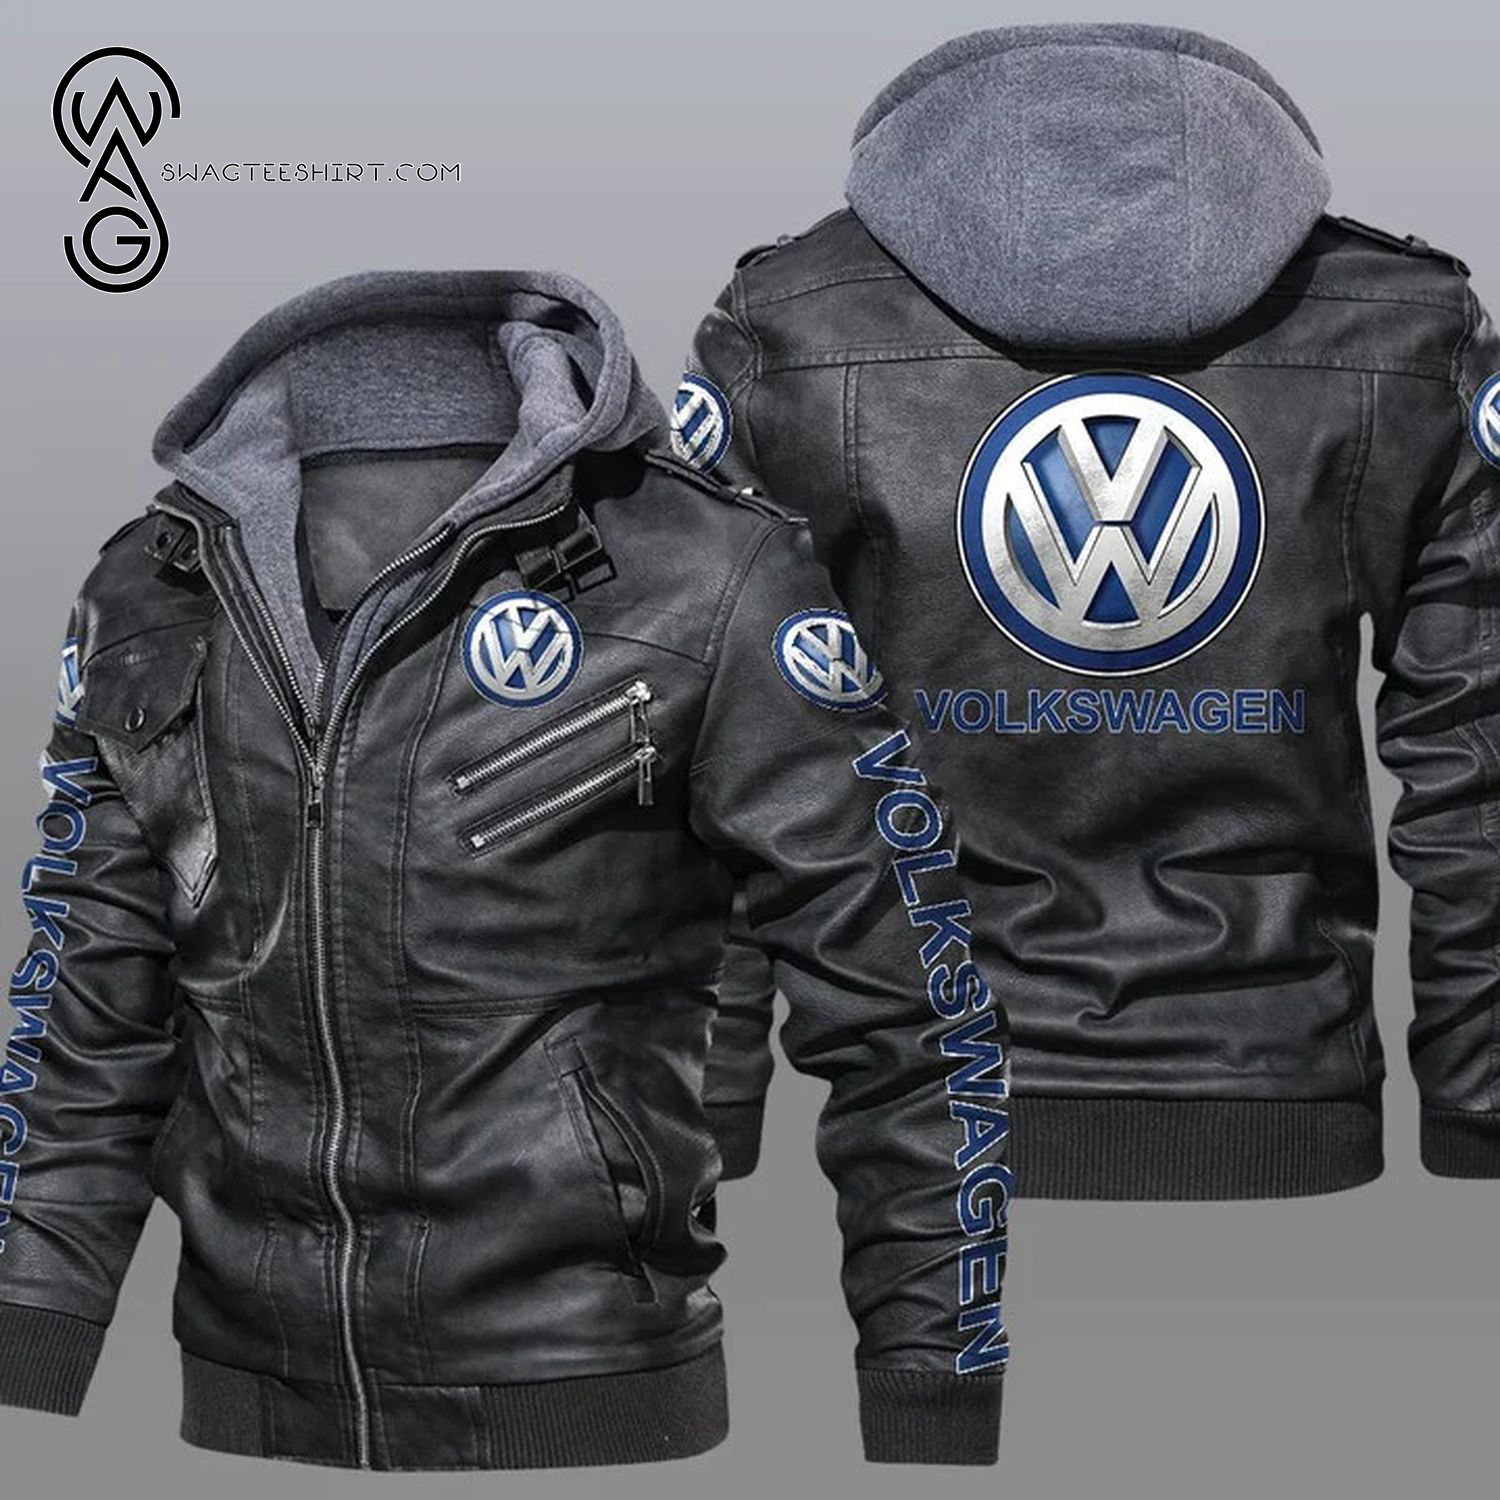 The Volkswagen Car Leather Jacket